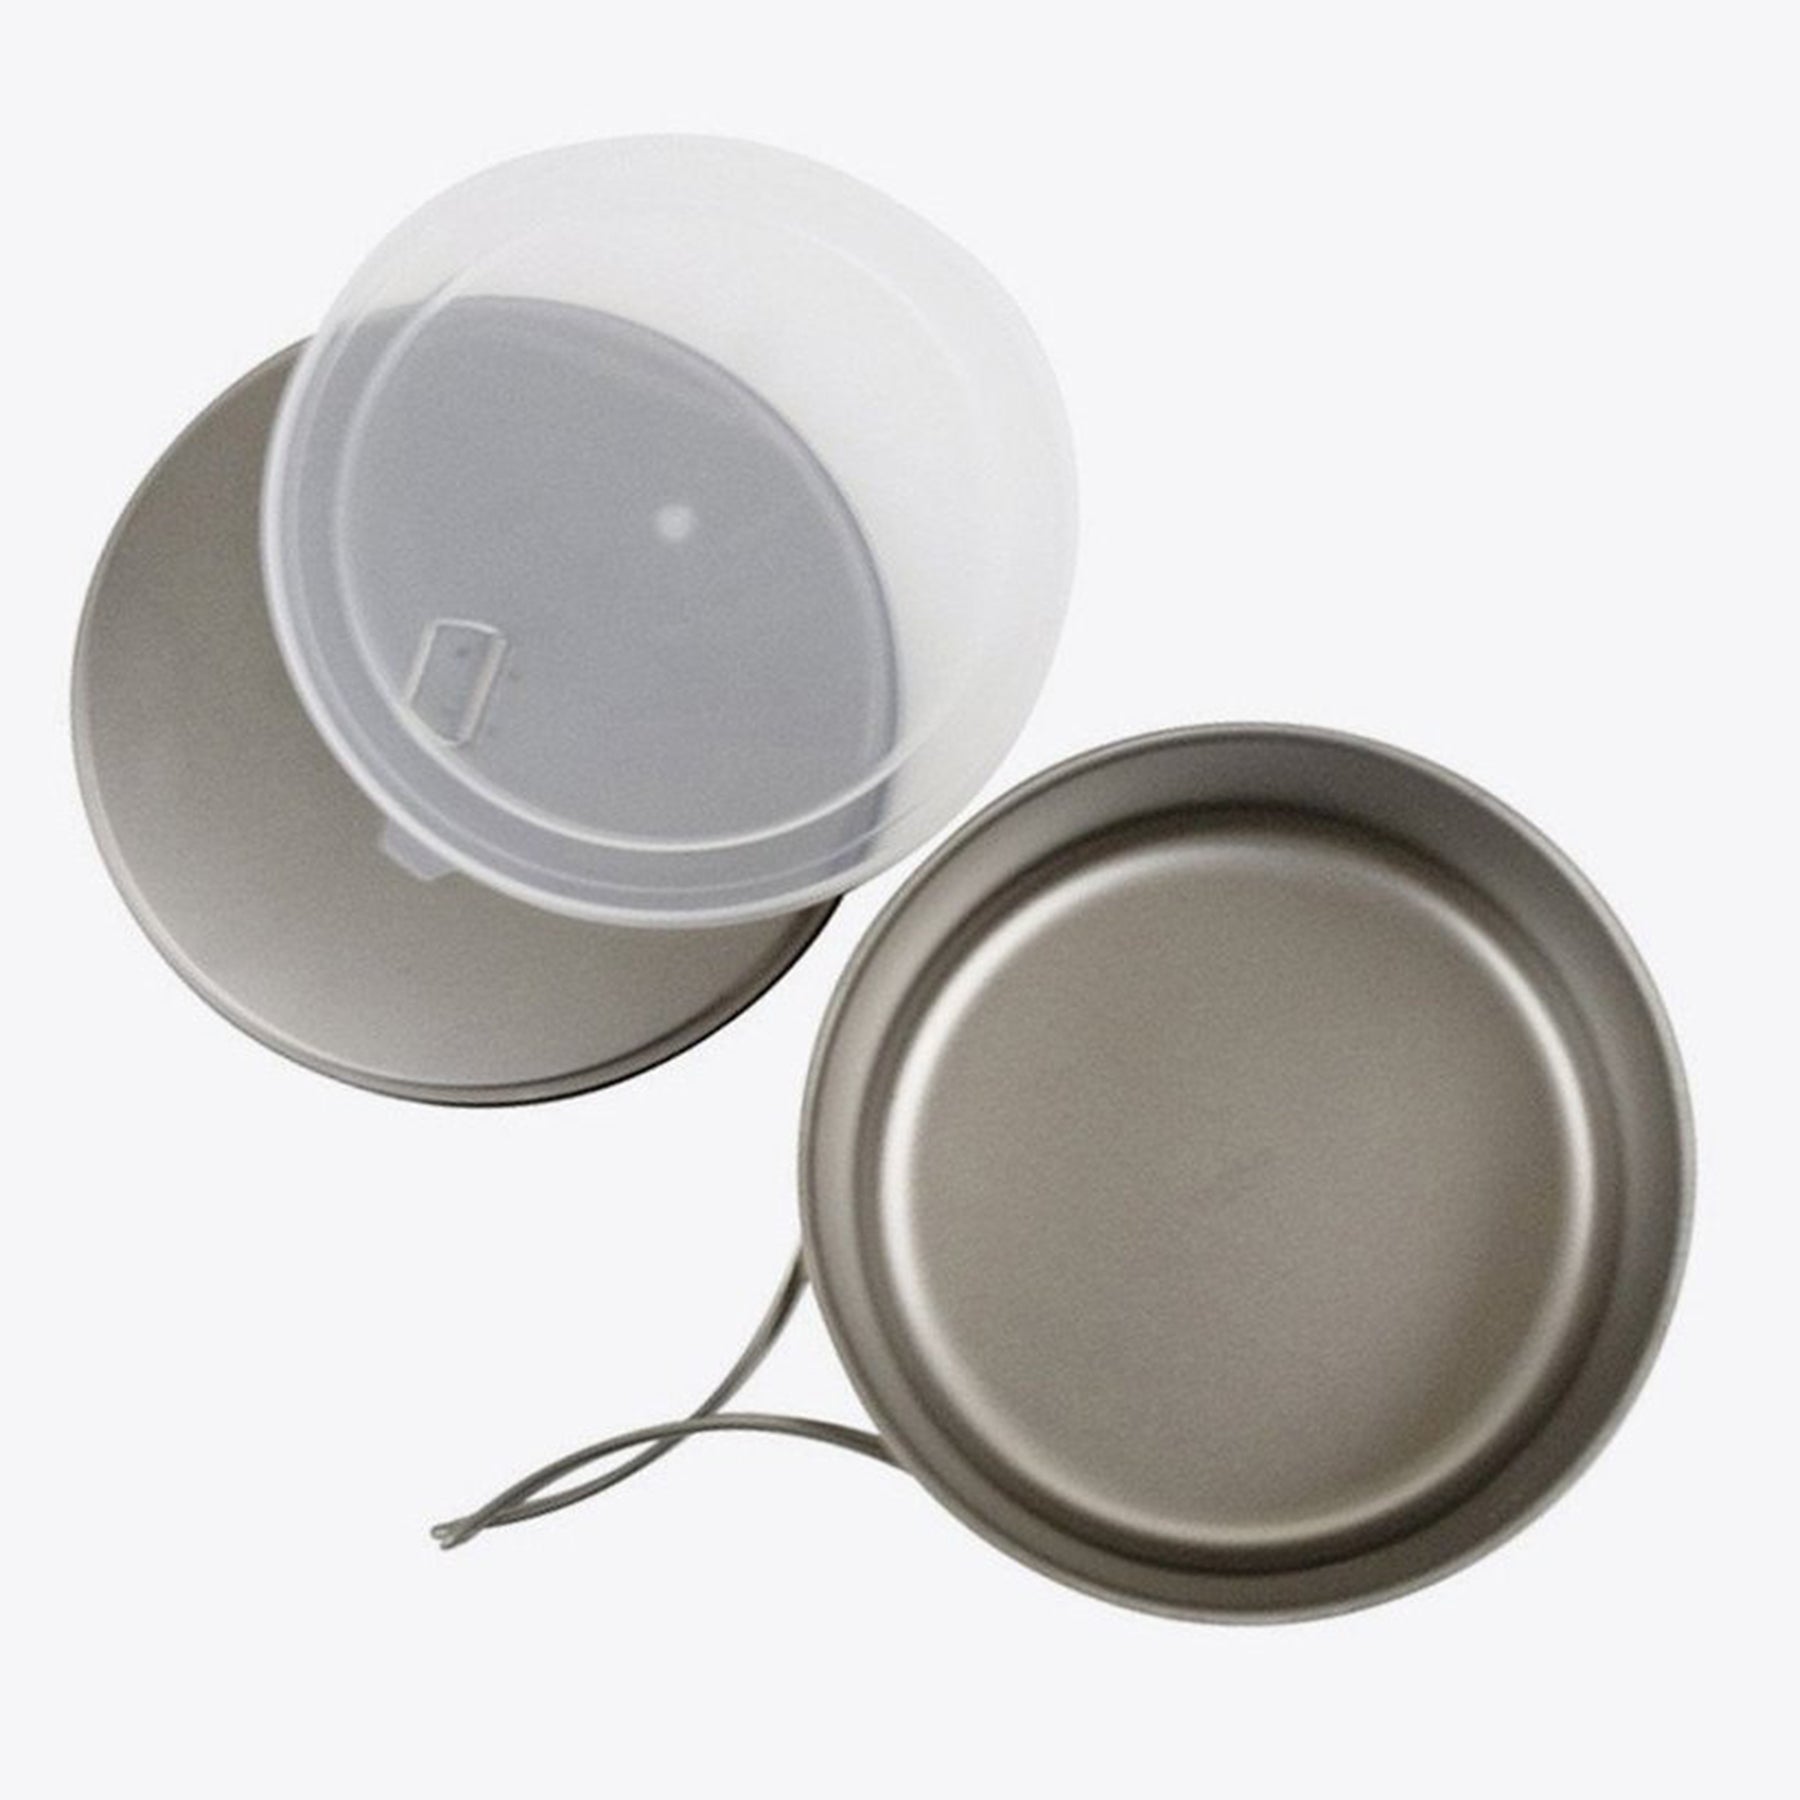 the set showing the pot without lid, the plastic lid, and the metal lid